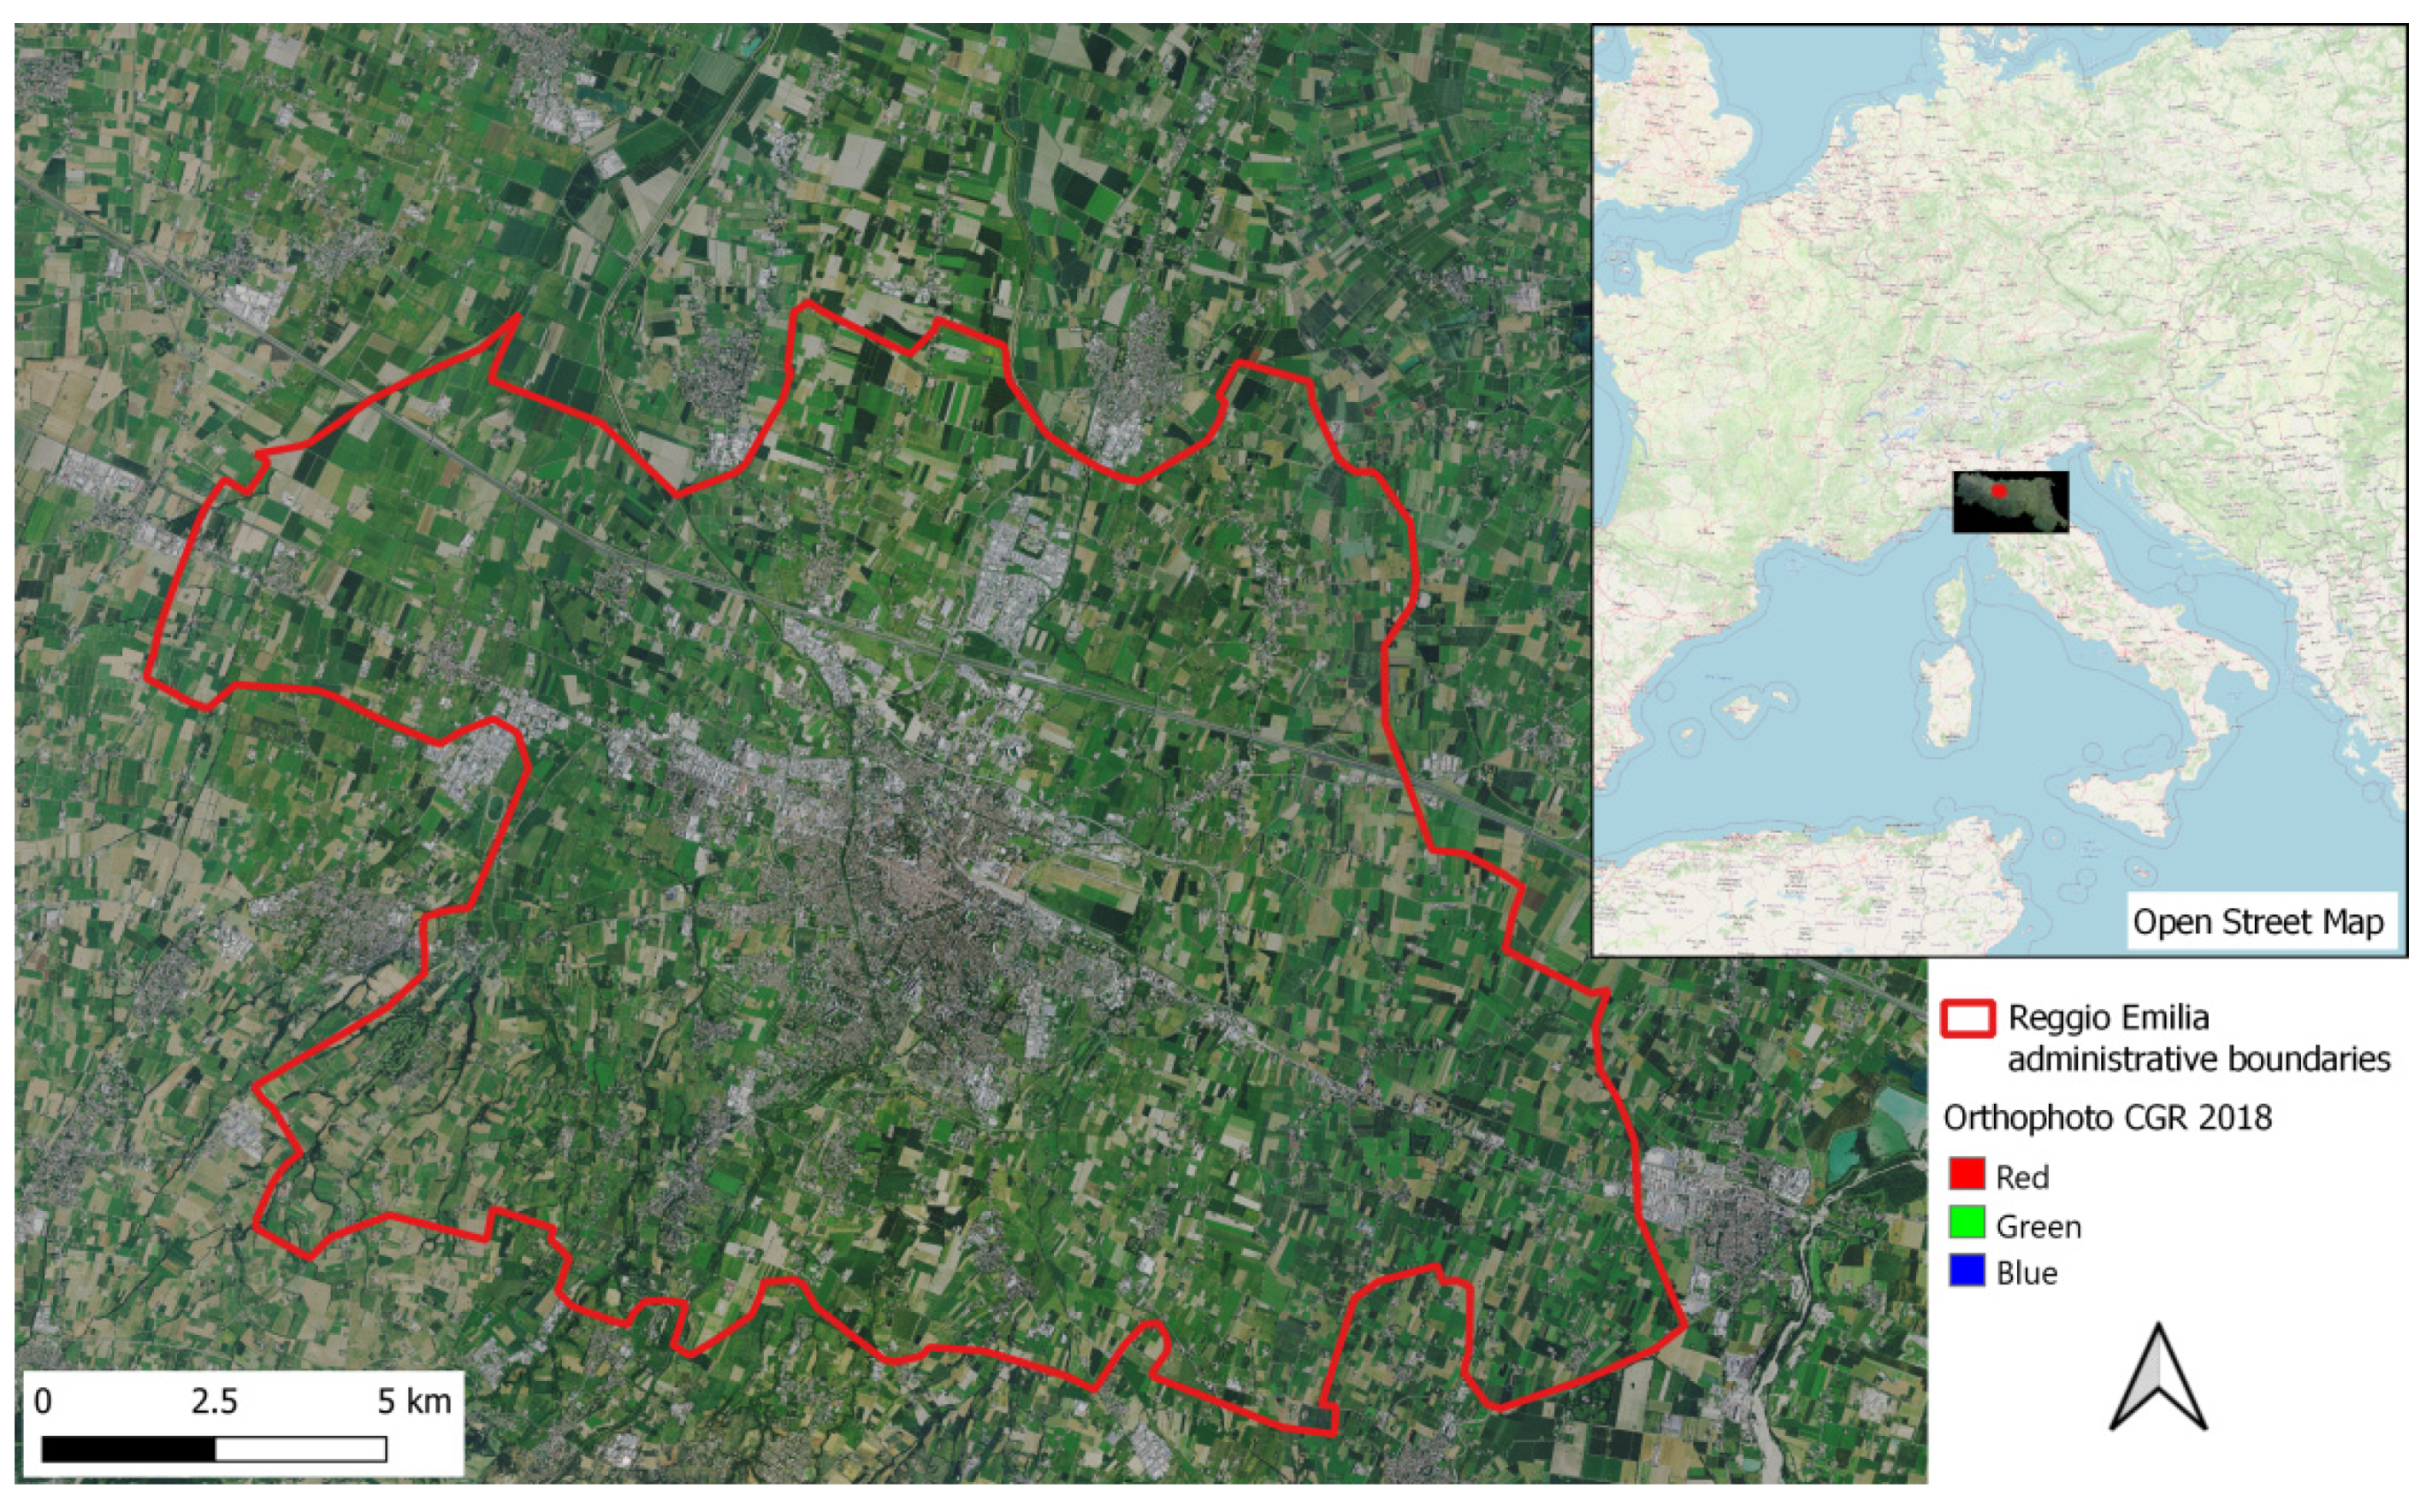 Bug Duplikering bevægelse Atmosphere | Free Full-Text | Identification of SUHI in Urban Areas by  Remote Sensing Data and Mitigation Hypothesis through Solar Reflective  Materials | HTML